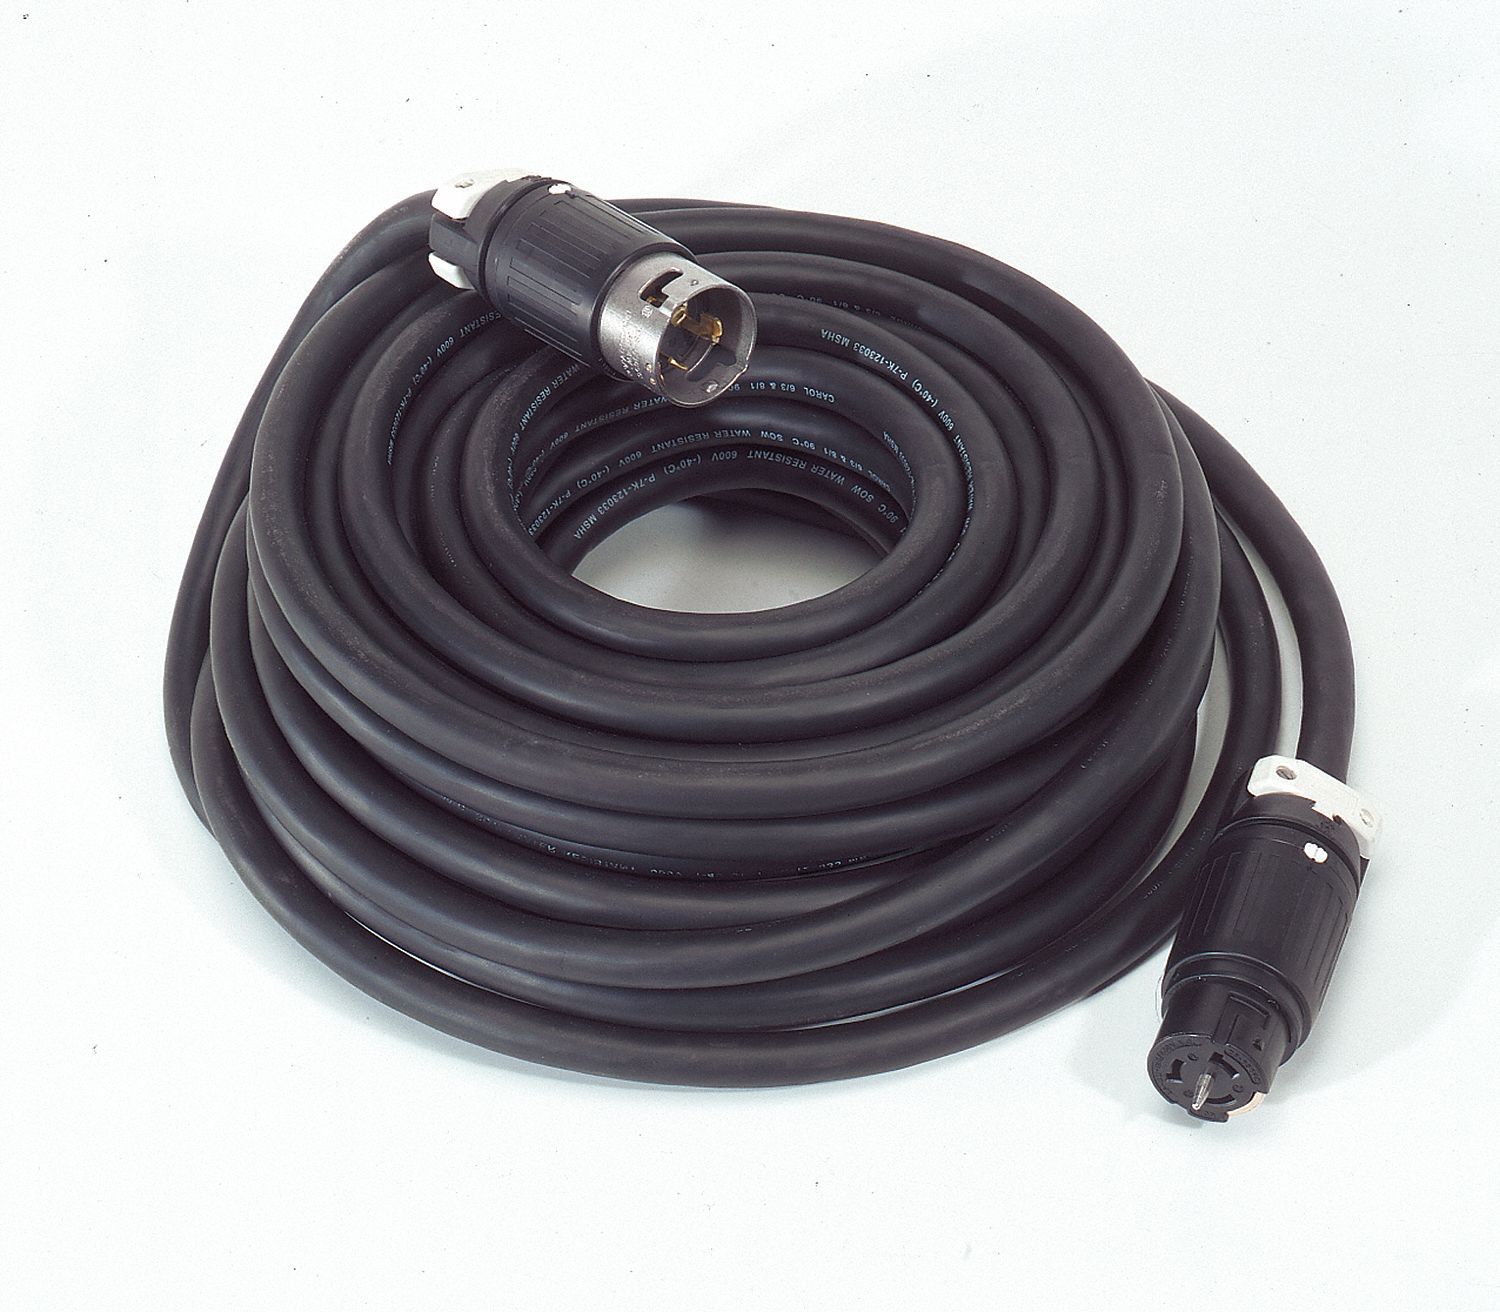 Indoor/Outdoor Extension Cord, 100 ft. Cord Length, 10/4 Gauge/Conductor, 20 Max. Amps